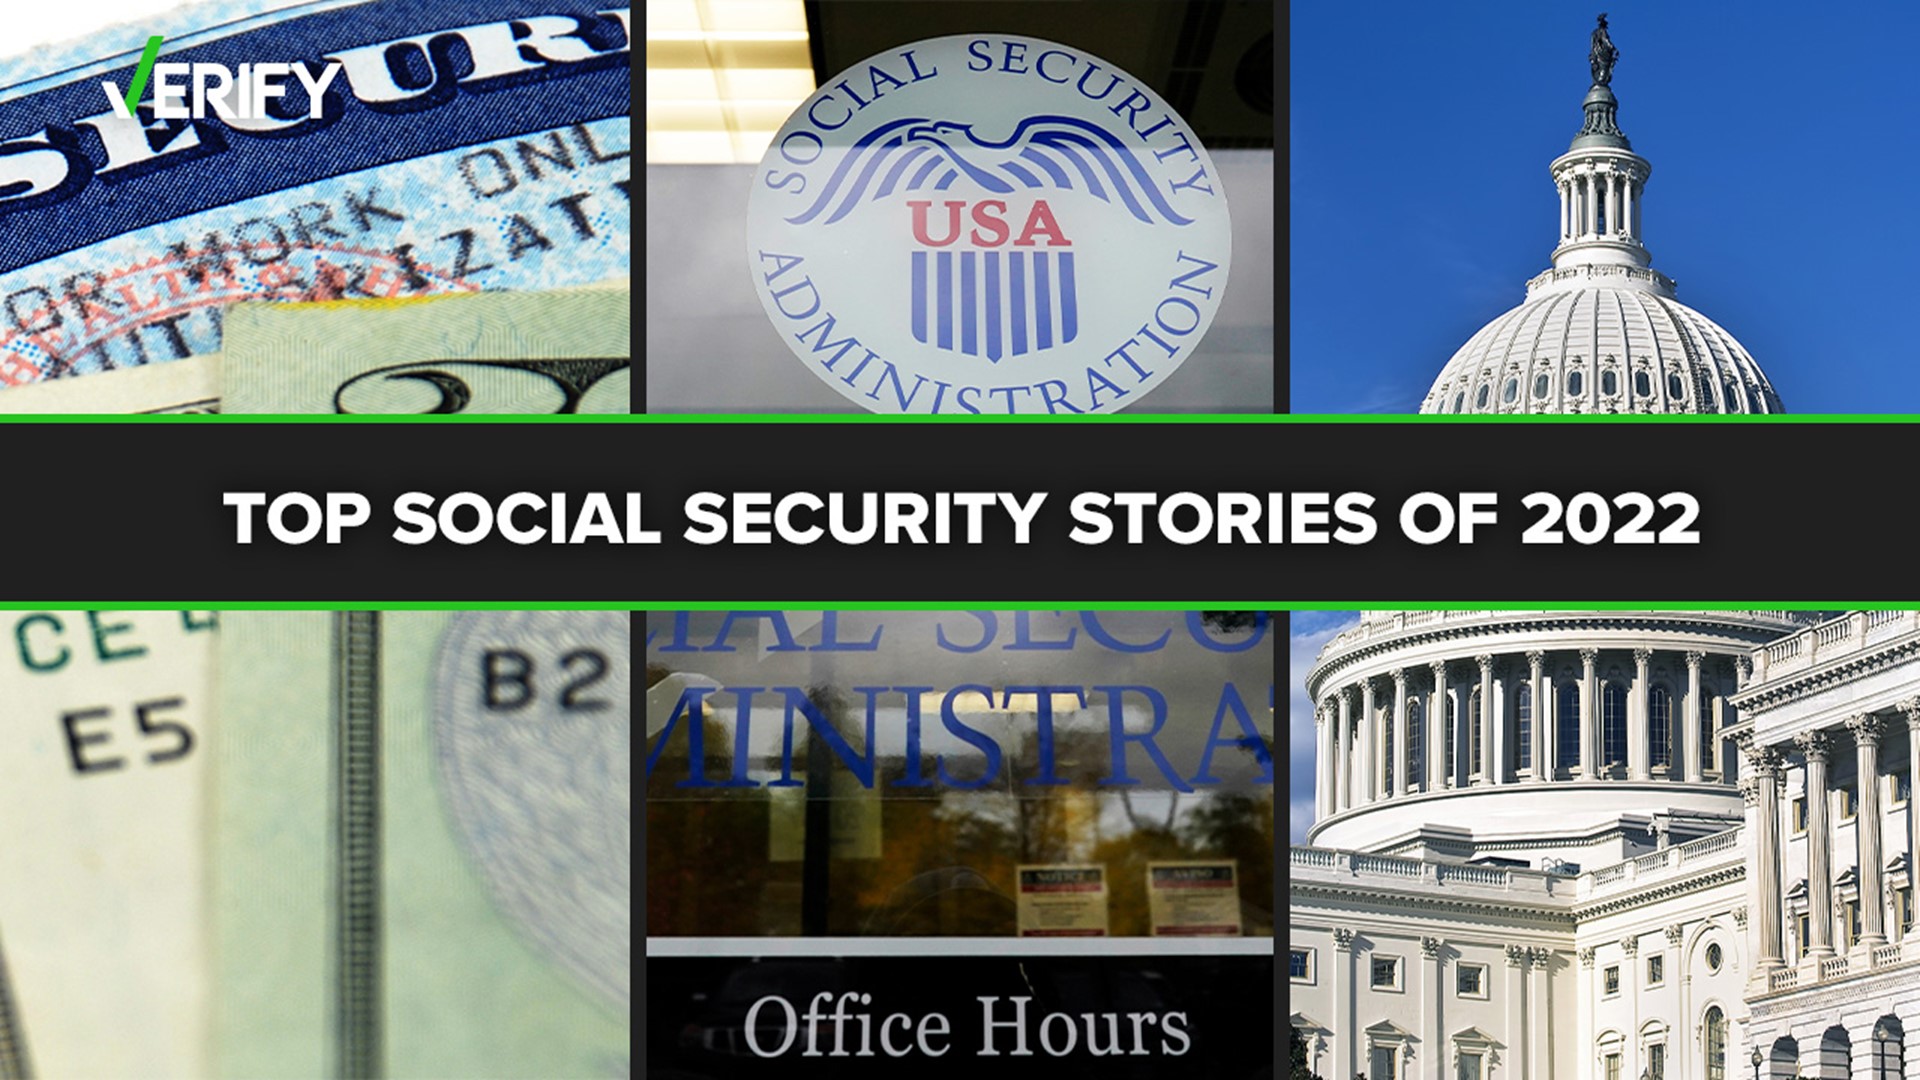 We looked into a lot of stories related to Social Security in 2022. In this video, we break down the top ones we verified.